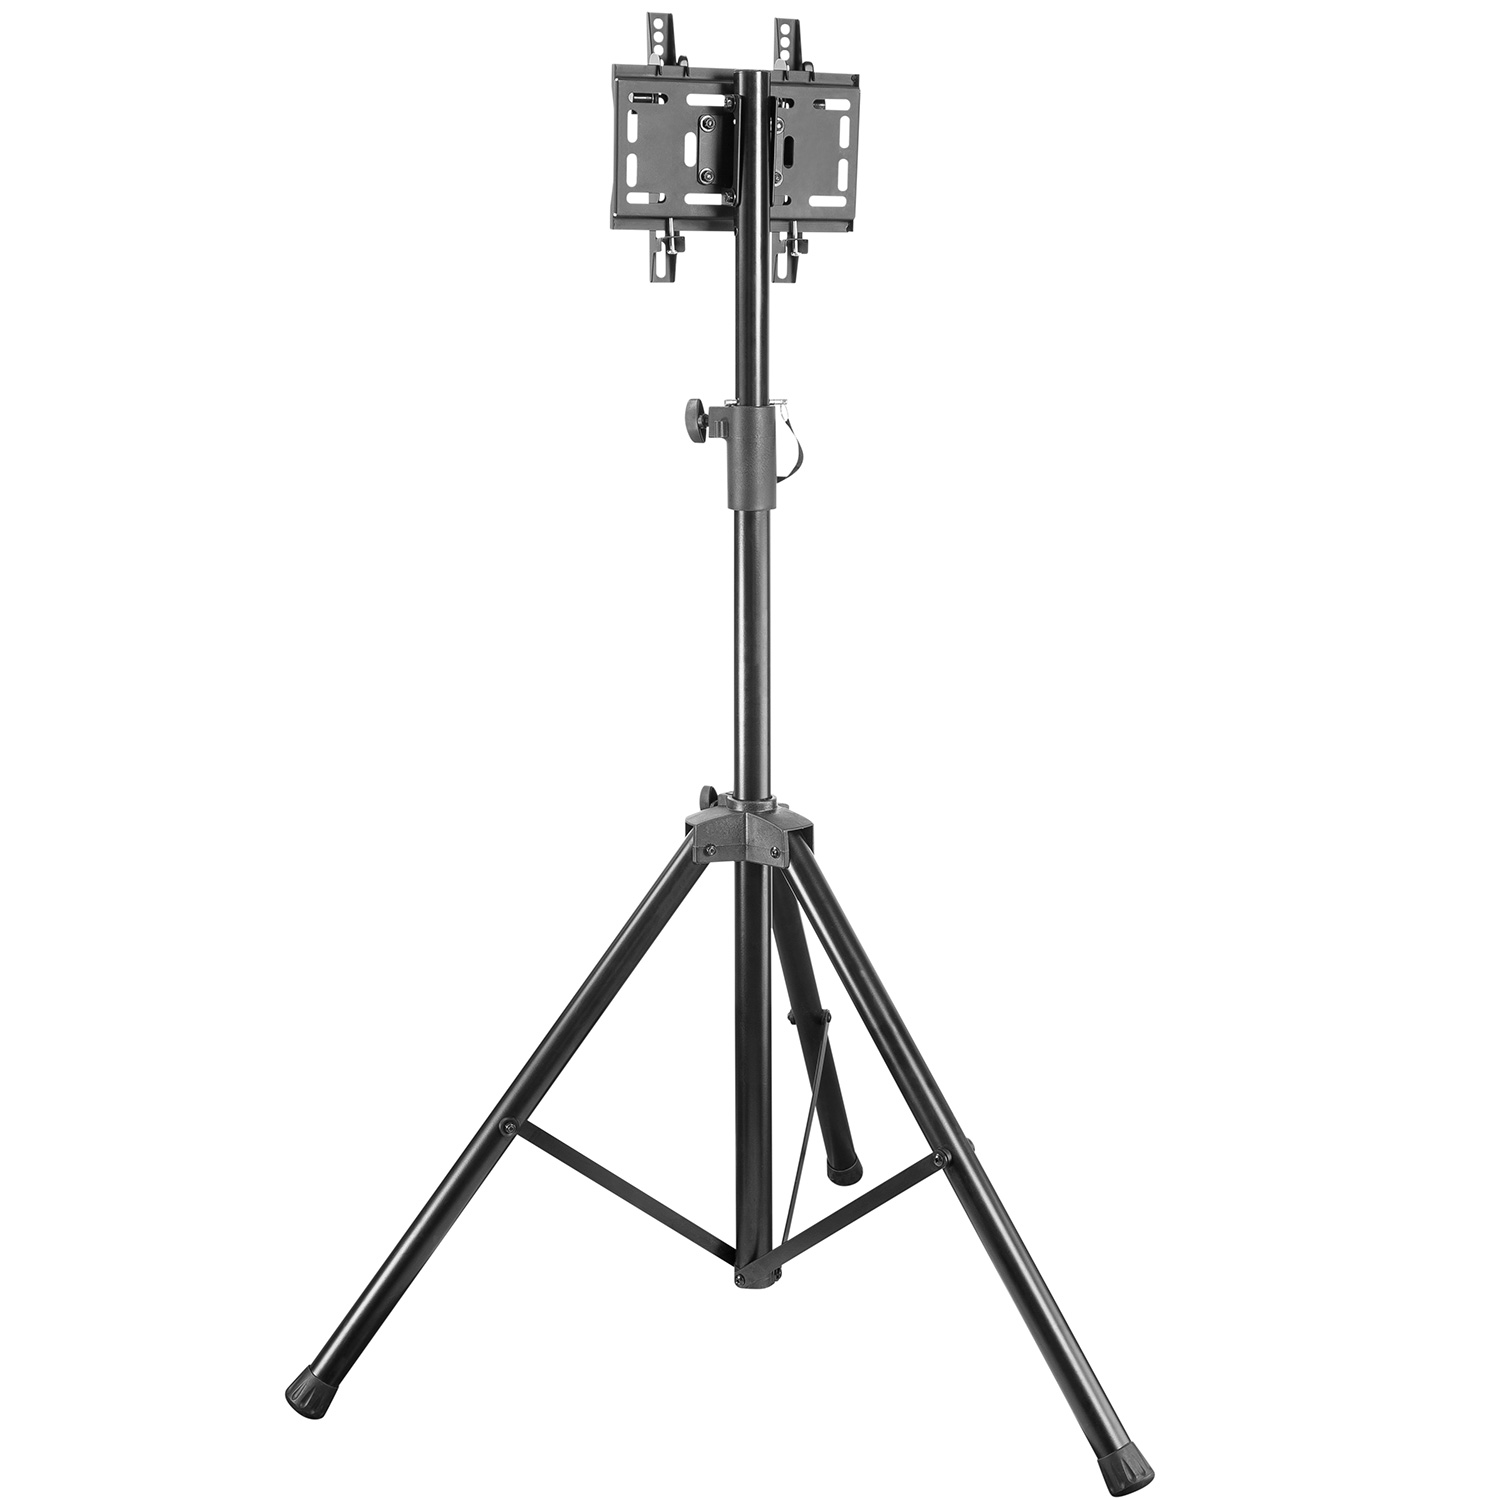 Mobile Floor Stand for 19 to 37 LCD/LED Monitors and TVs up to 40 kg TP940 Portable TV Tripod stand w/up to VESA 200 x 200 Mounting Bracket Tilt up/down 20° Freely Pan 360° Max Height 180 cm